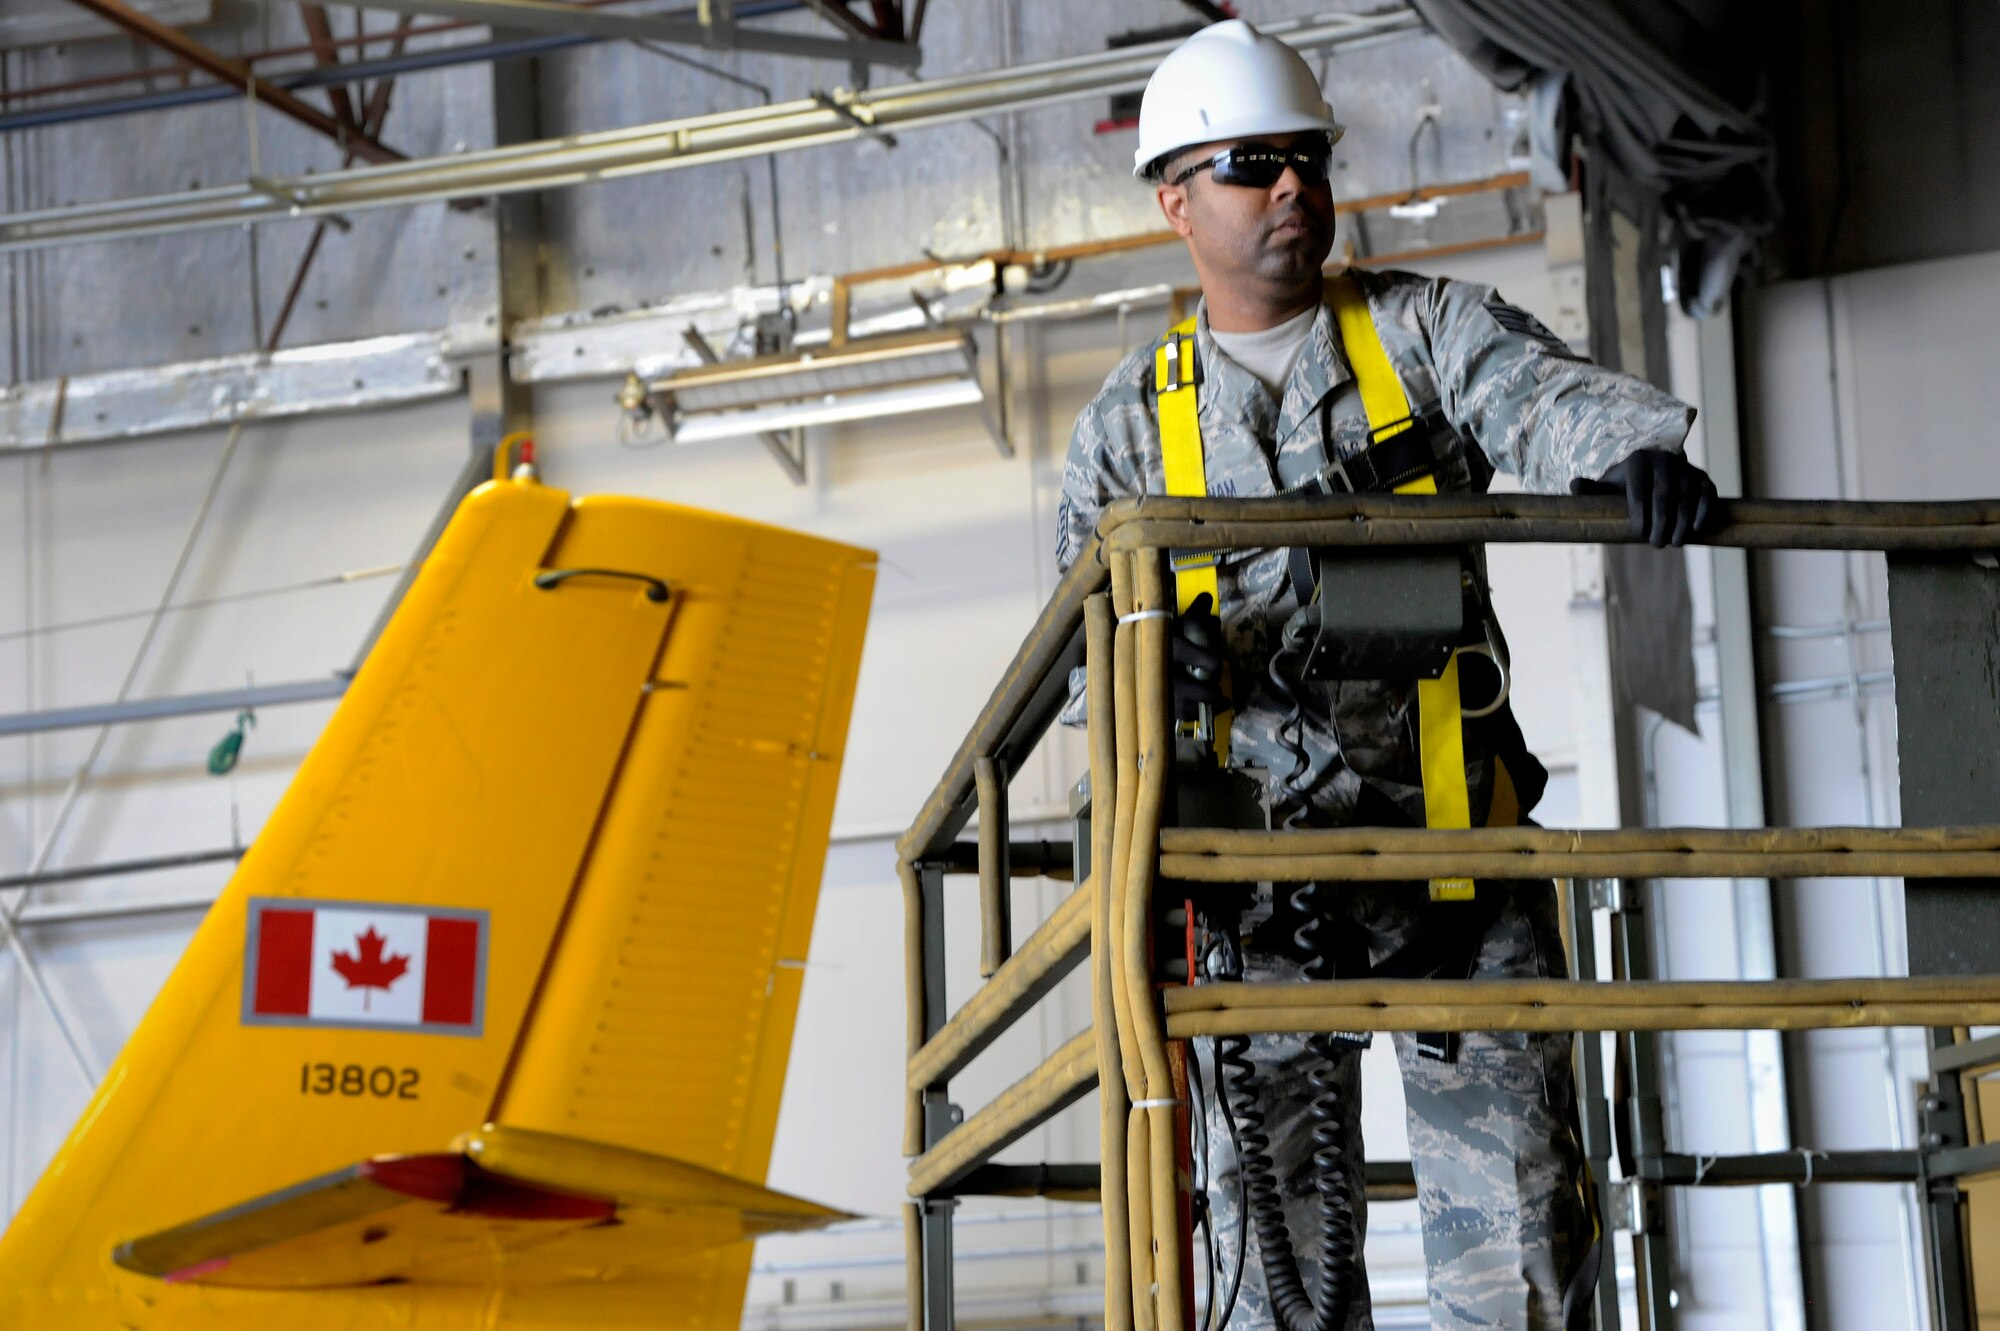 Oregon Air National Guard Staff Sgt. Brandon Bingham, assigned to the 142nd Fighter Wing Civil Engineer Squadron (CES) moves a scissor lift into place to install new lights for the 440th Squadron/Escadrille hangar, Yellowknife, Northwest Territories, Canada, July 21, 2017. The Oregon CES members are deployed for two-weeks for training along with CAF members from Cold Lake, Alberta. (U.S. Air National Guard photo/Master Sgt. John Hughel, 142nd Fighter Wing Public Affairs)